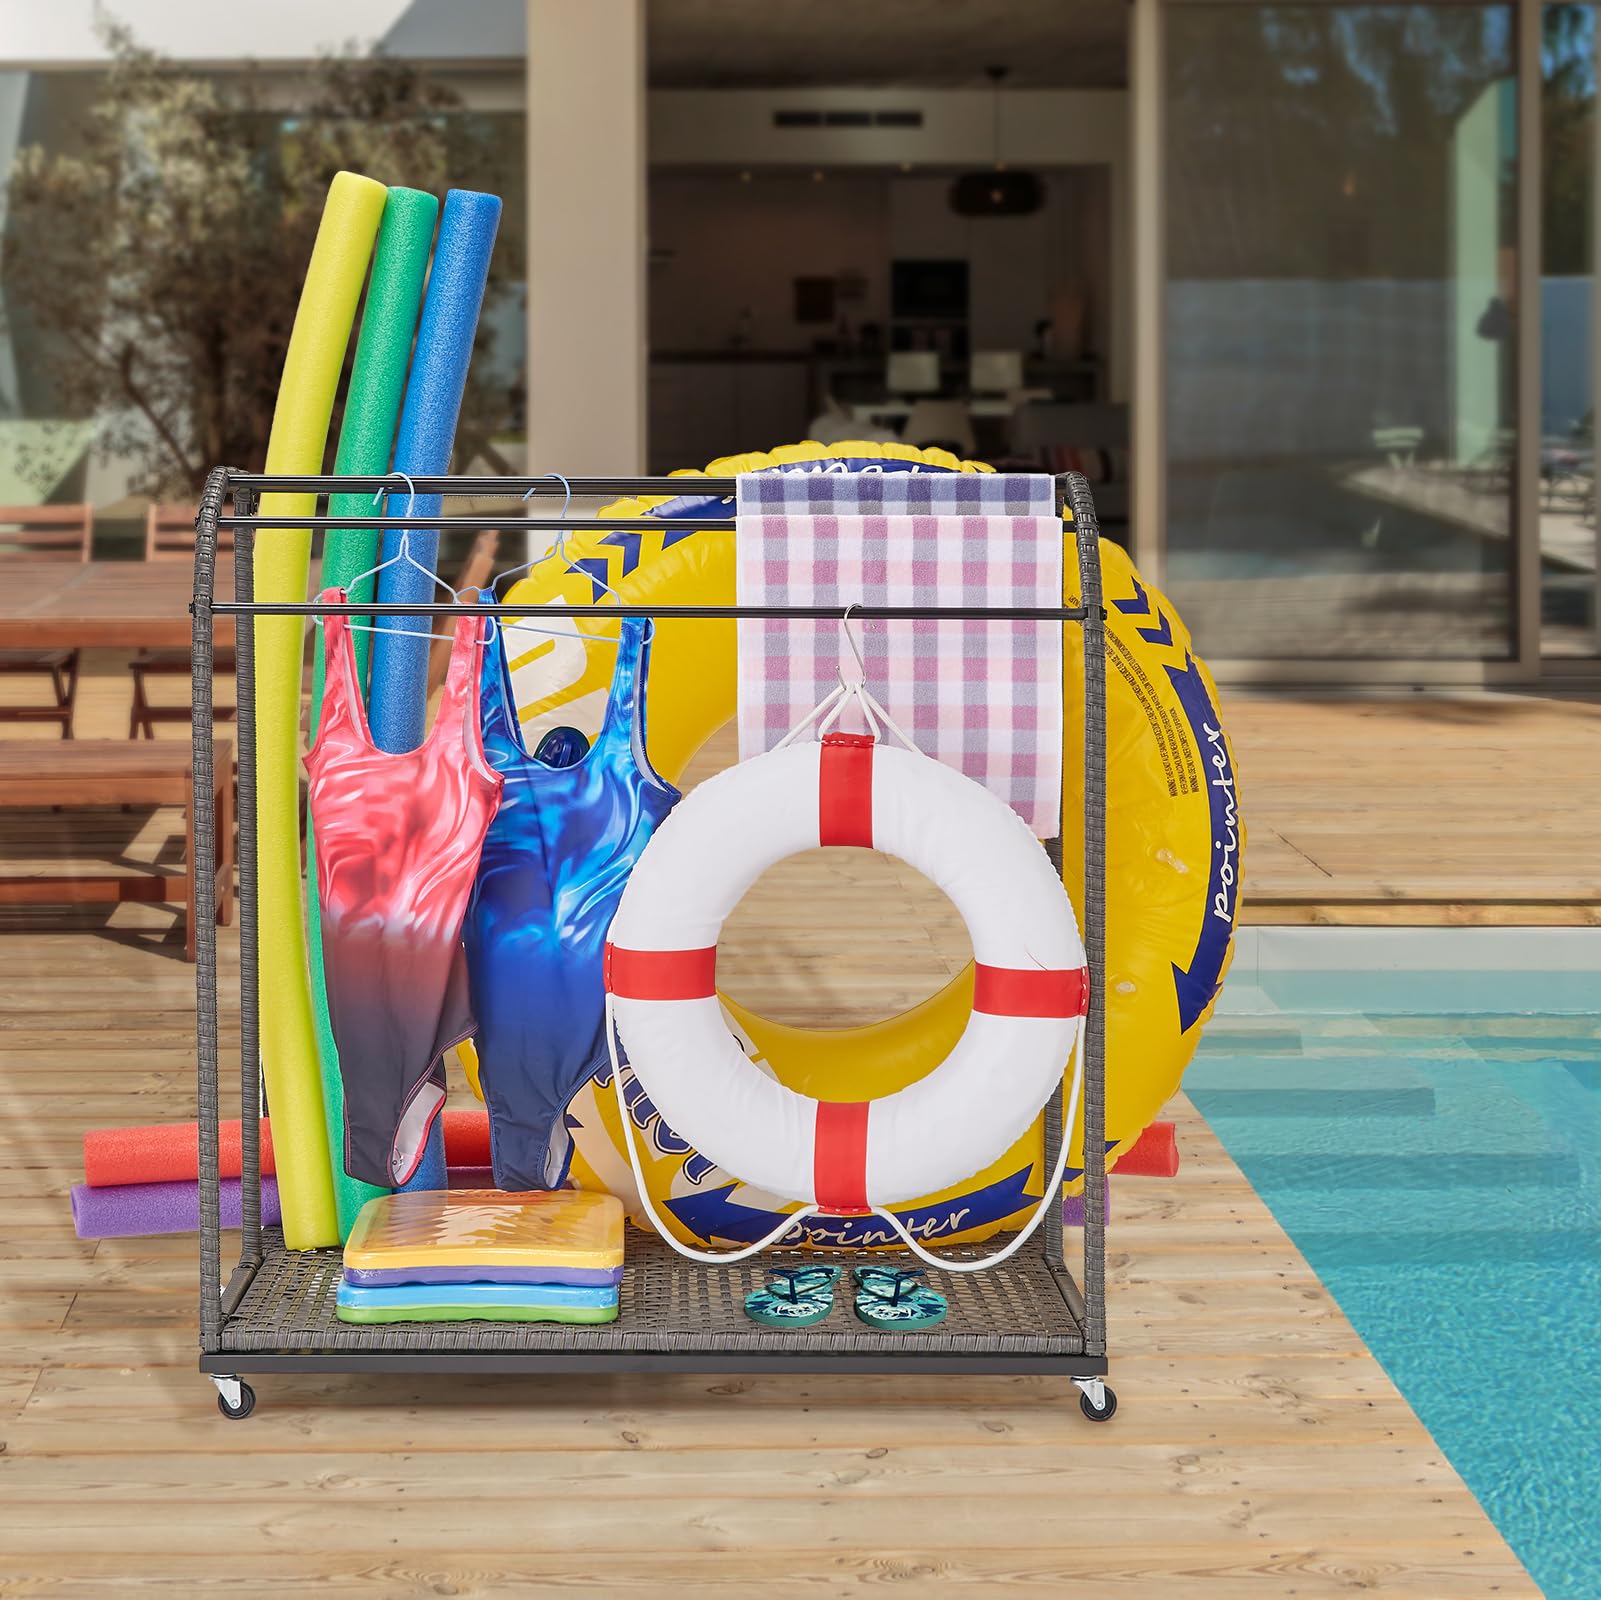 Poolside Outdoor Storage,Towel Rack Freestanding,Storage Organizer with Compartment for Floats, Pool Noodles, Swimming Rings,5 Bar Pool Towel Rack with Rattan Base for Outdoor/Indoor